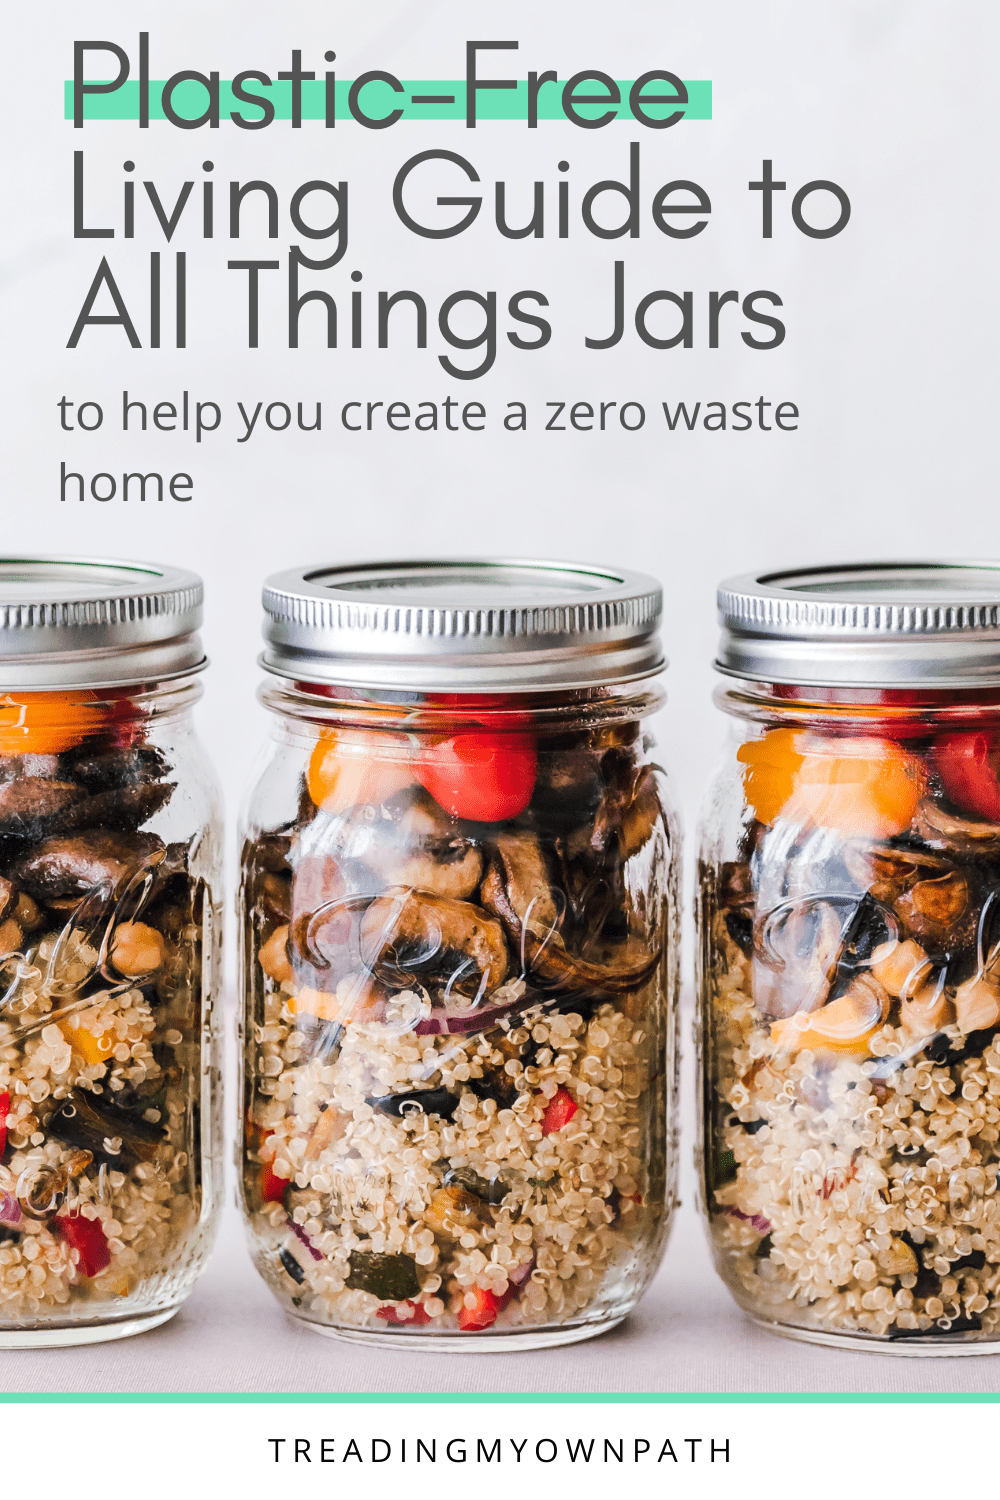 A Zero Waste, Plastic-Free Living Guide to All Things Jars